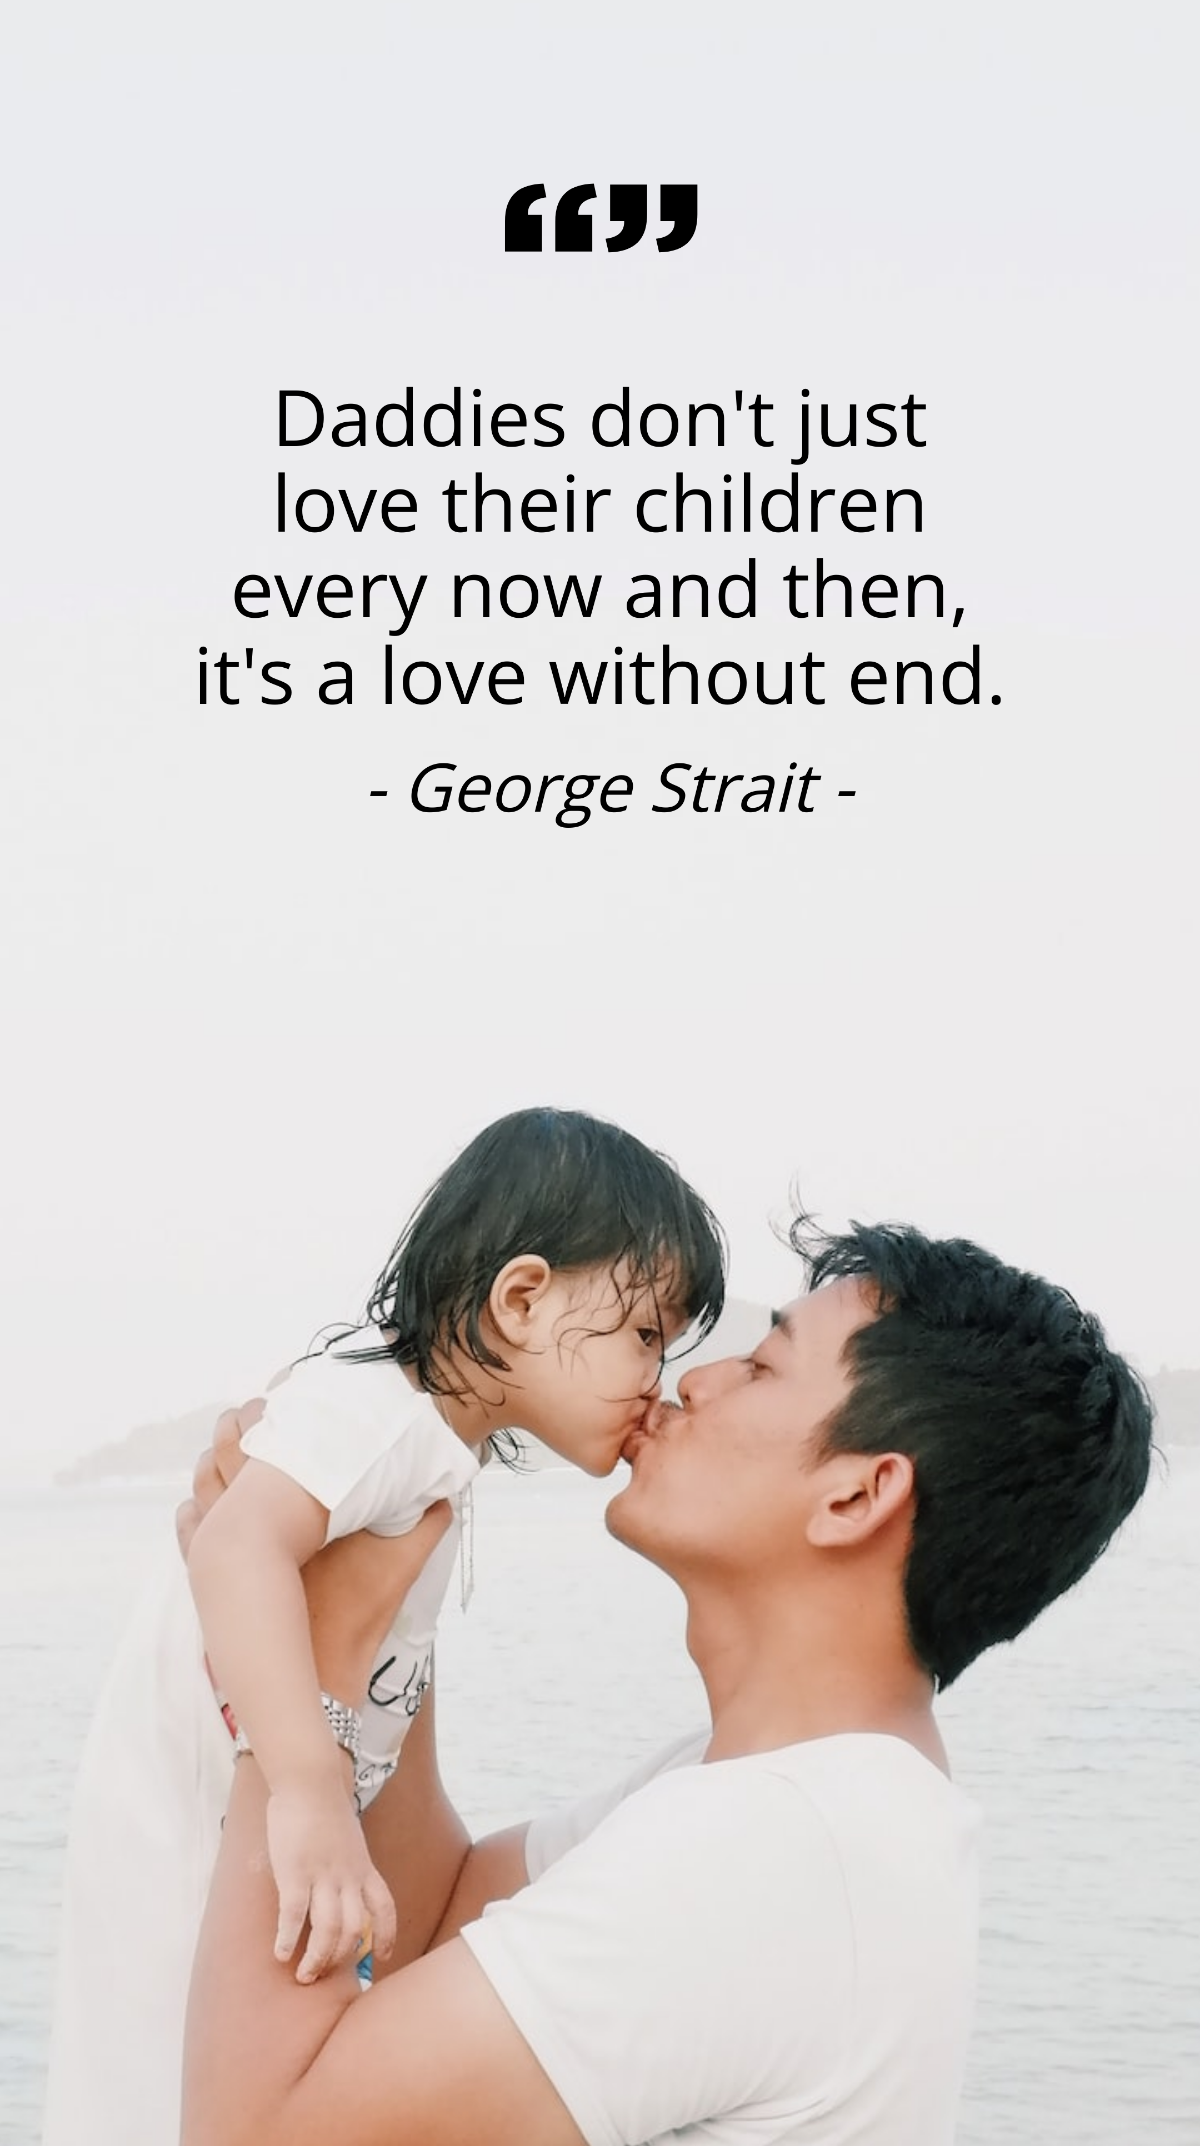 George Strait - Daddies don't just love their children every now and then, it's a love without end. Template